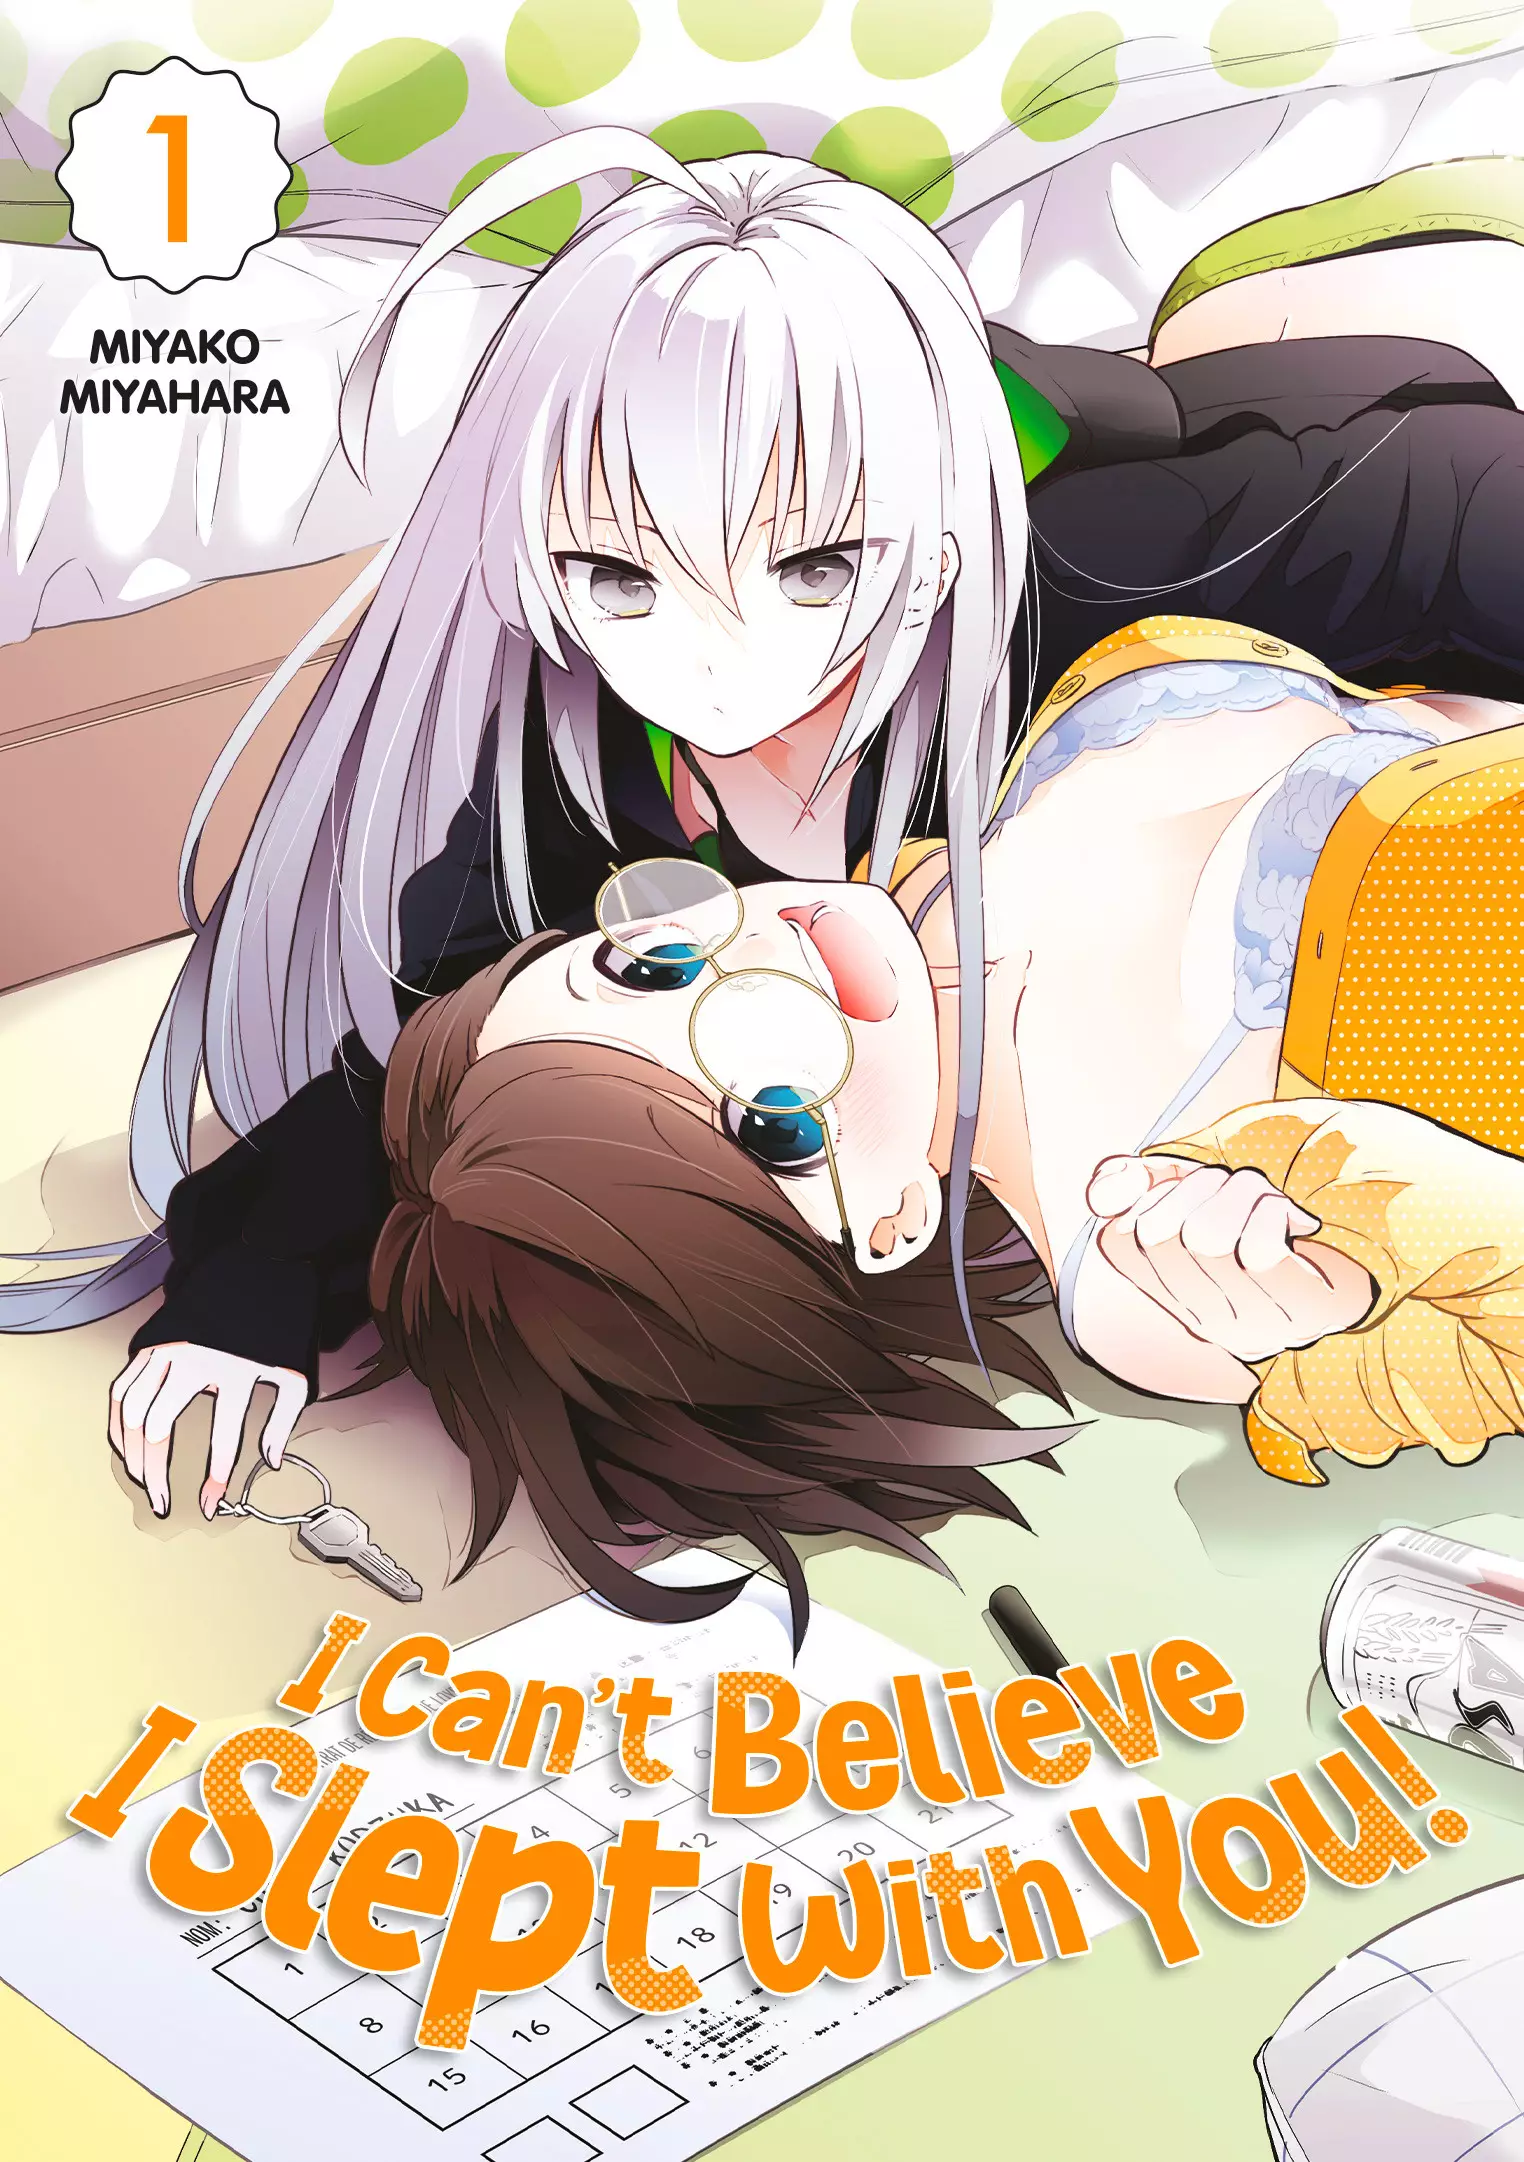 I Can't Believe I Slept With You [Yuri] I_Can_t_Believe_I_Slept_With_You_1_meian